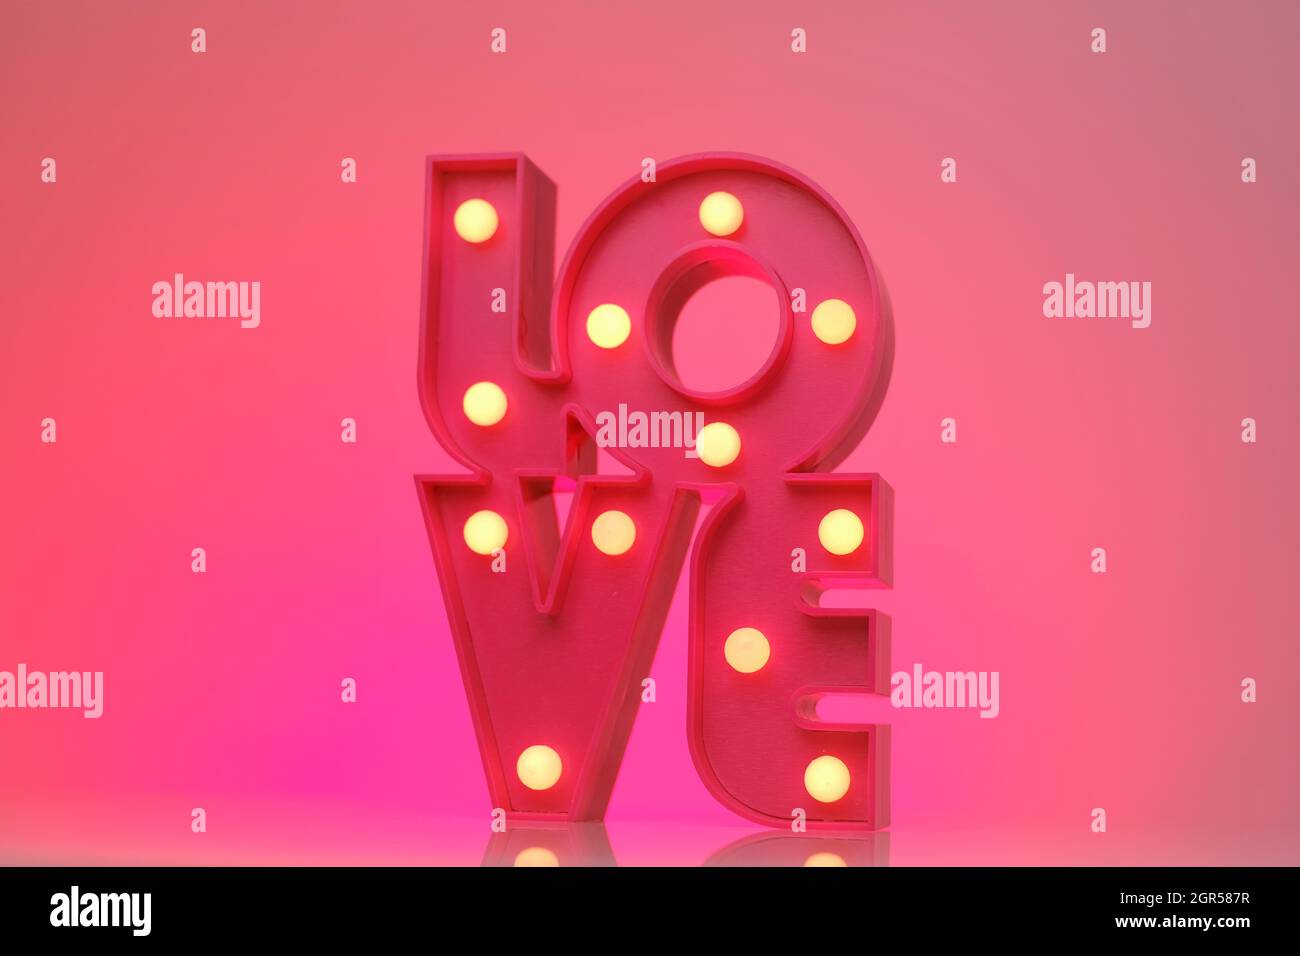 Love.Pink lettering love on a bright neon pink background.Relationships and feelings. Valentine's Day.  Stock Photo